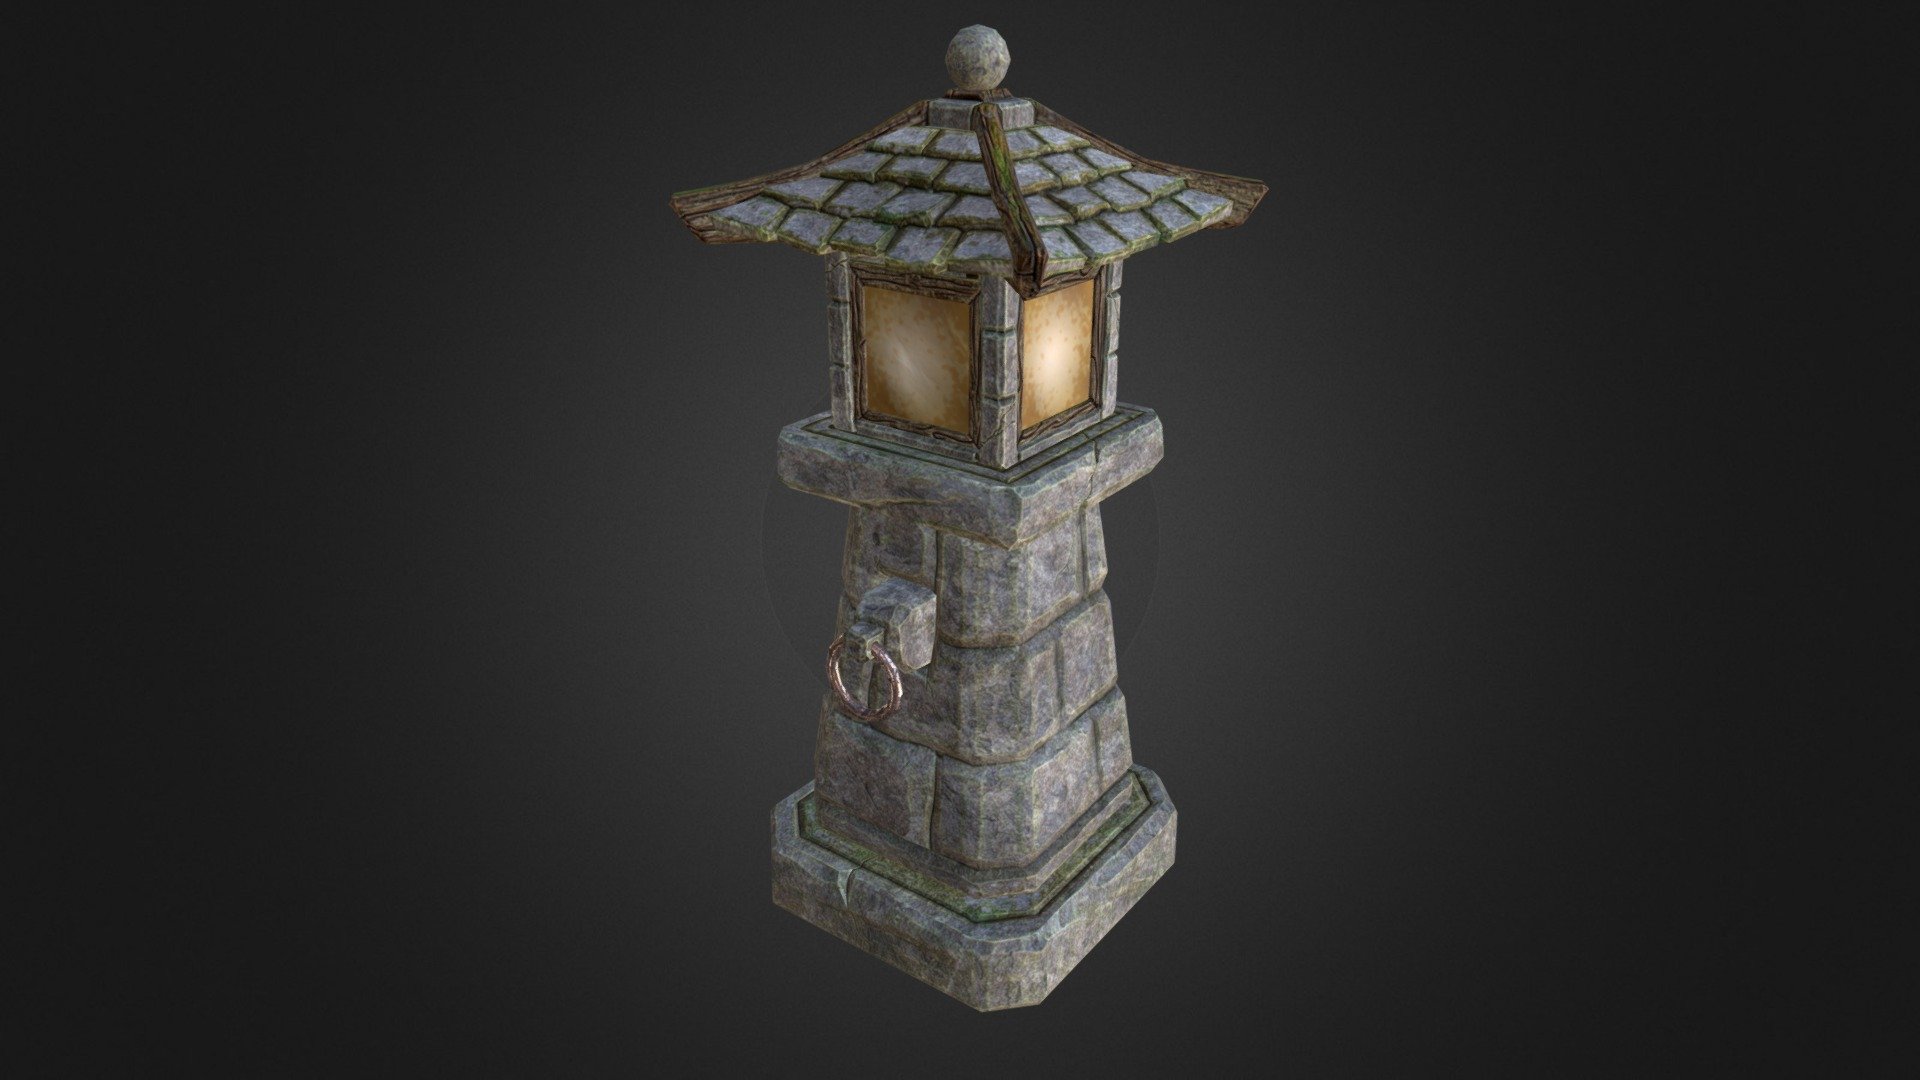 A few months old project. One of my first delves into ZBrush and 3DCoat. I'd like to spen more time on the textures, but I think I've spent enough time on this already. Better to move on to other projects. 

3ds Max, Zbrush, 3DCoat, xNormal, Photoshop - Pagoda Lantern - 3D model by carelessantics 3d model